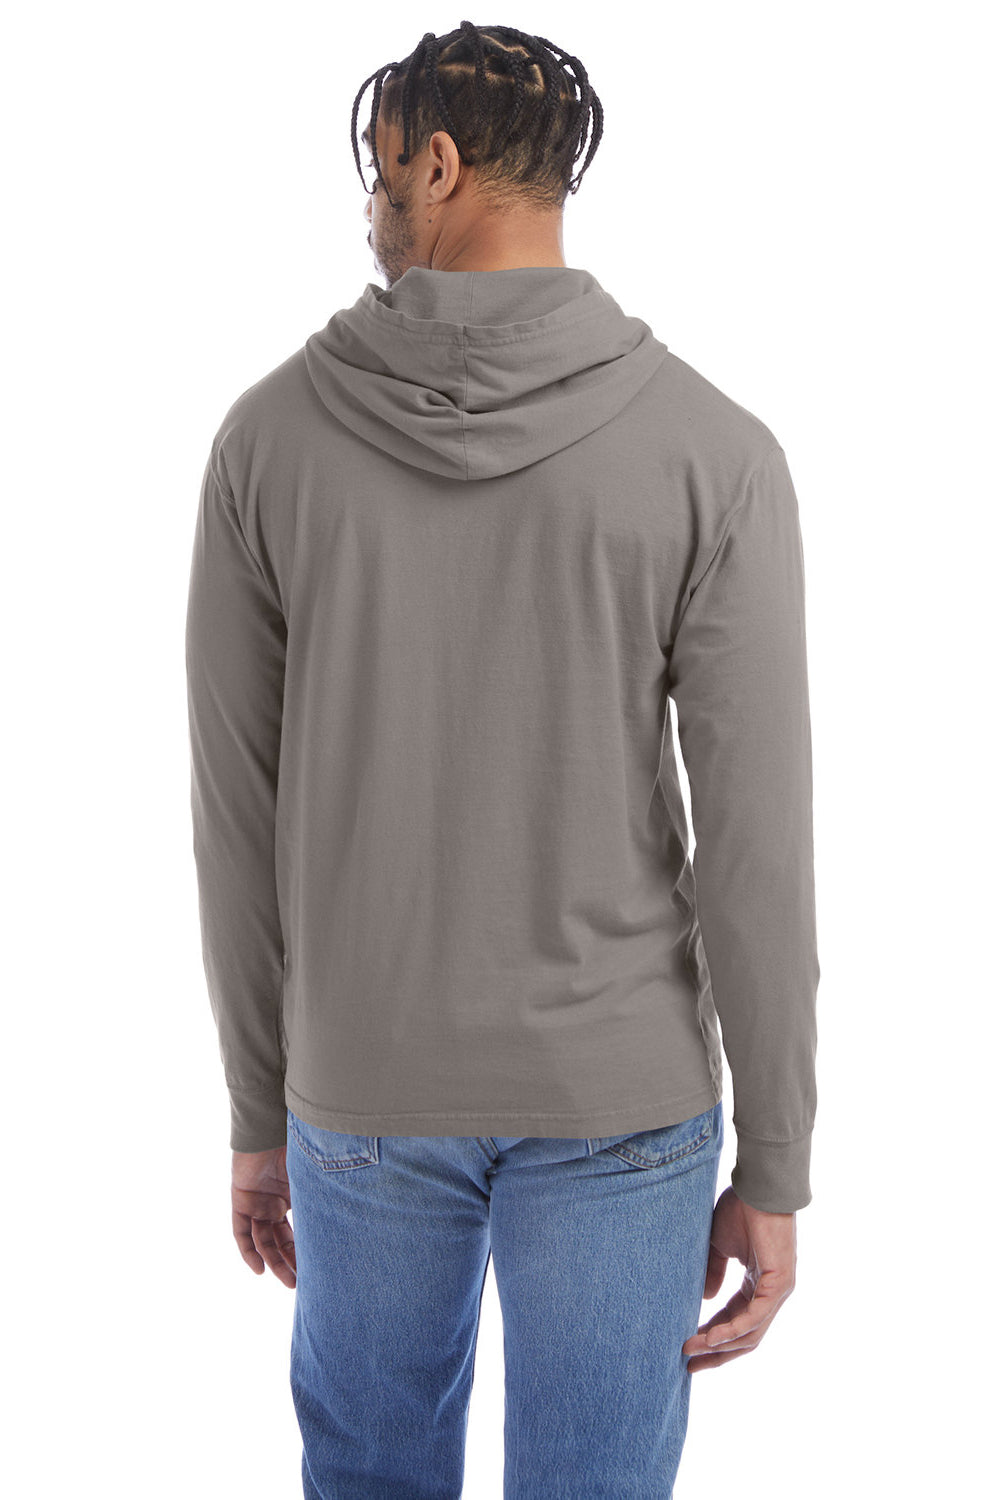 ComfortWash by Hanes GDH280 Mens Jersey Long Sleeve Hooded T-Shirt Hoodie Concrete Grey Back